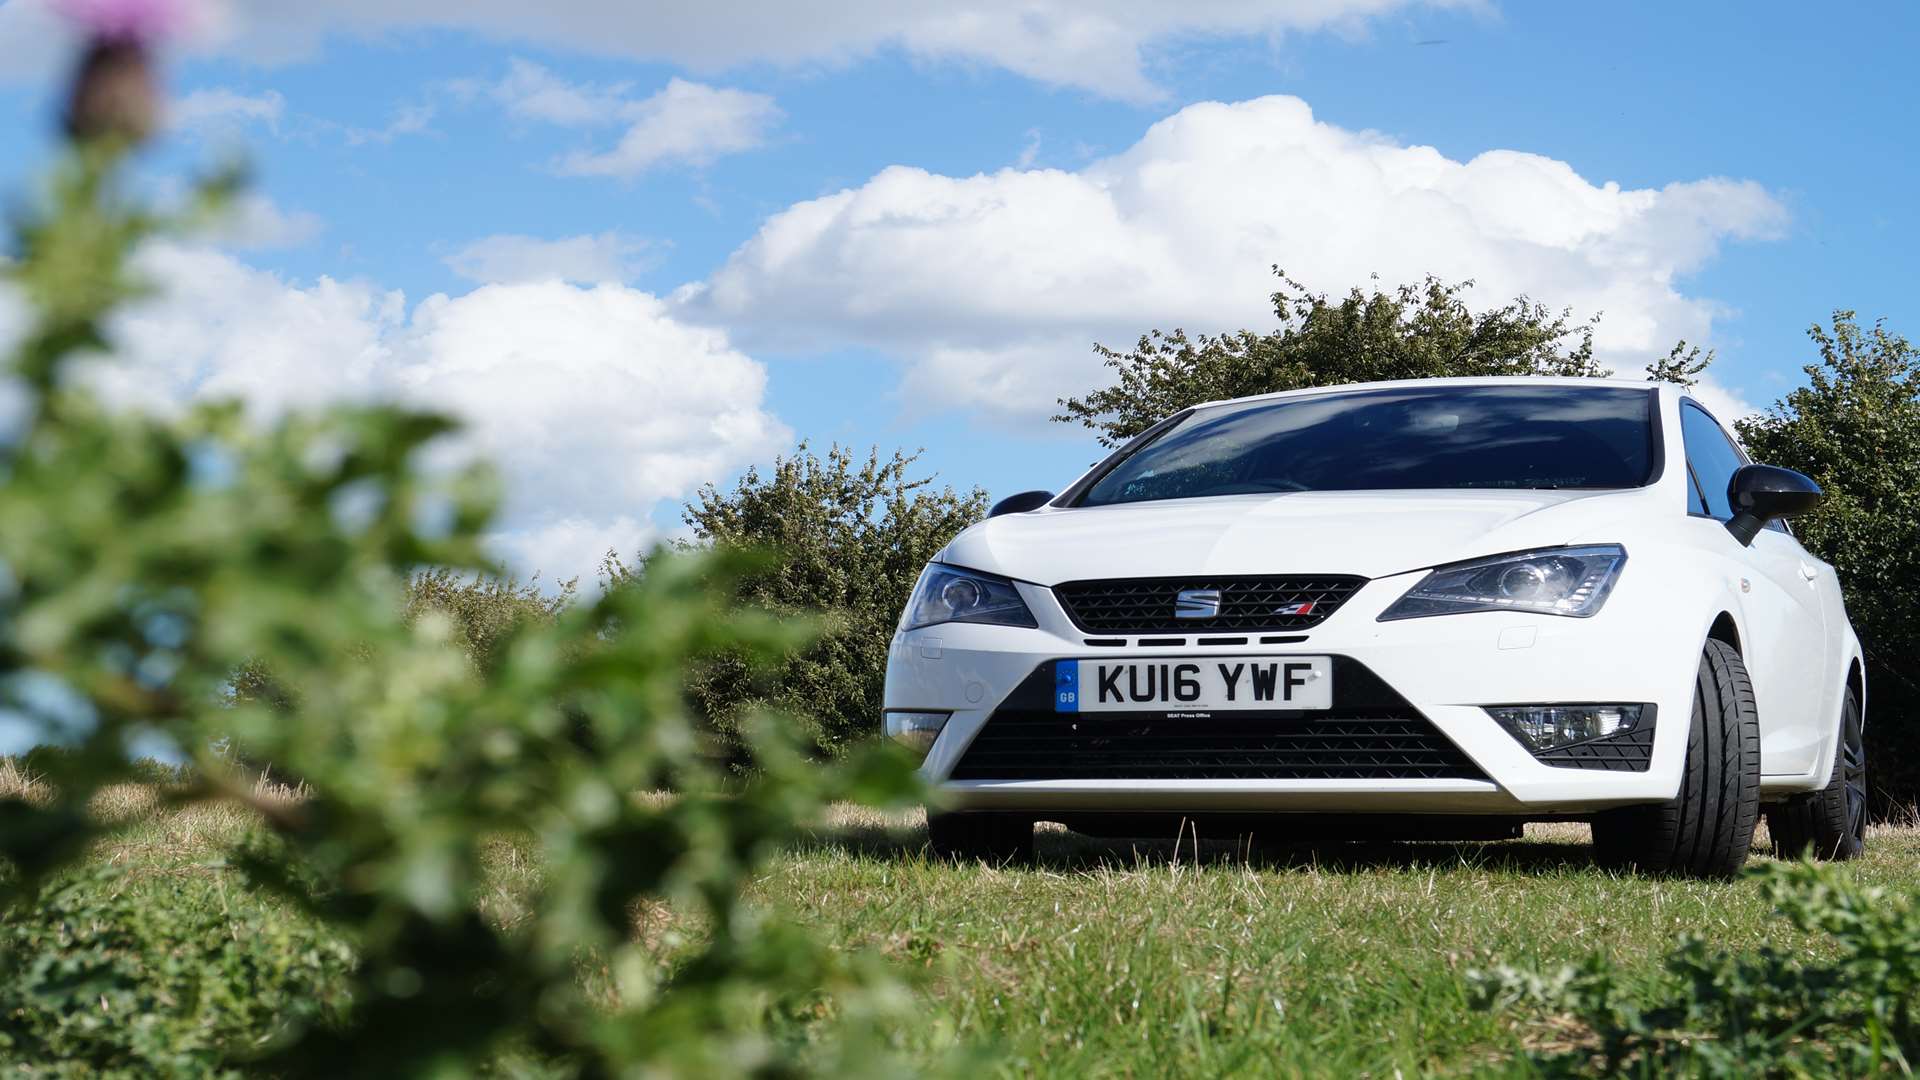 The Ibiza Cupra combines potent performance with excellent value